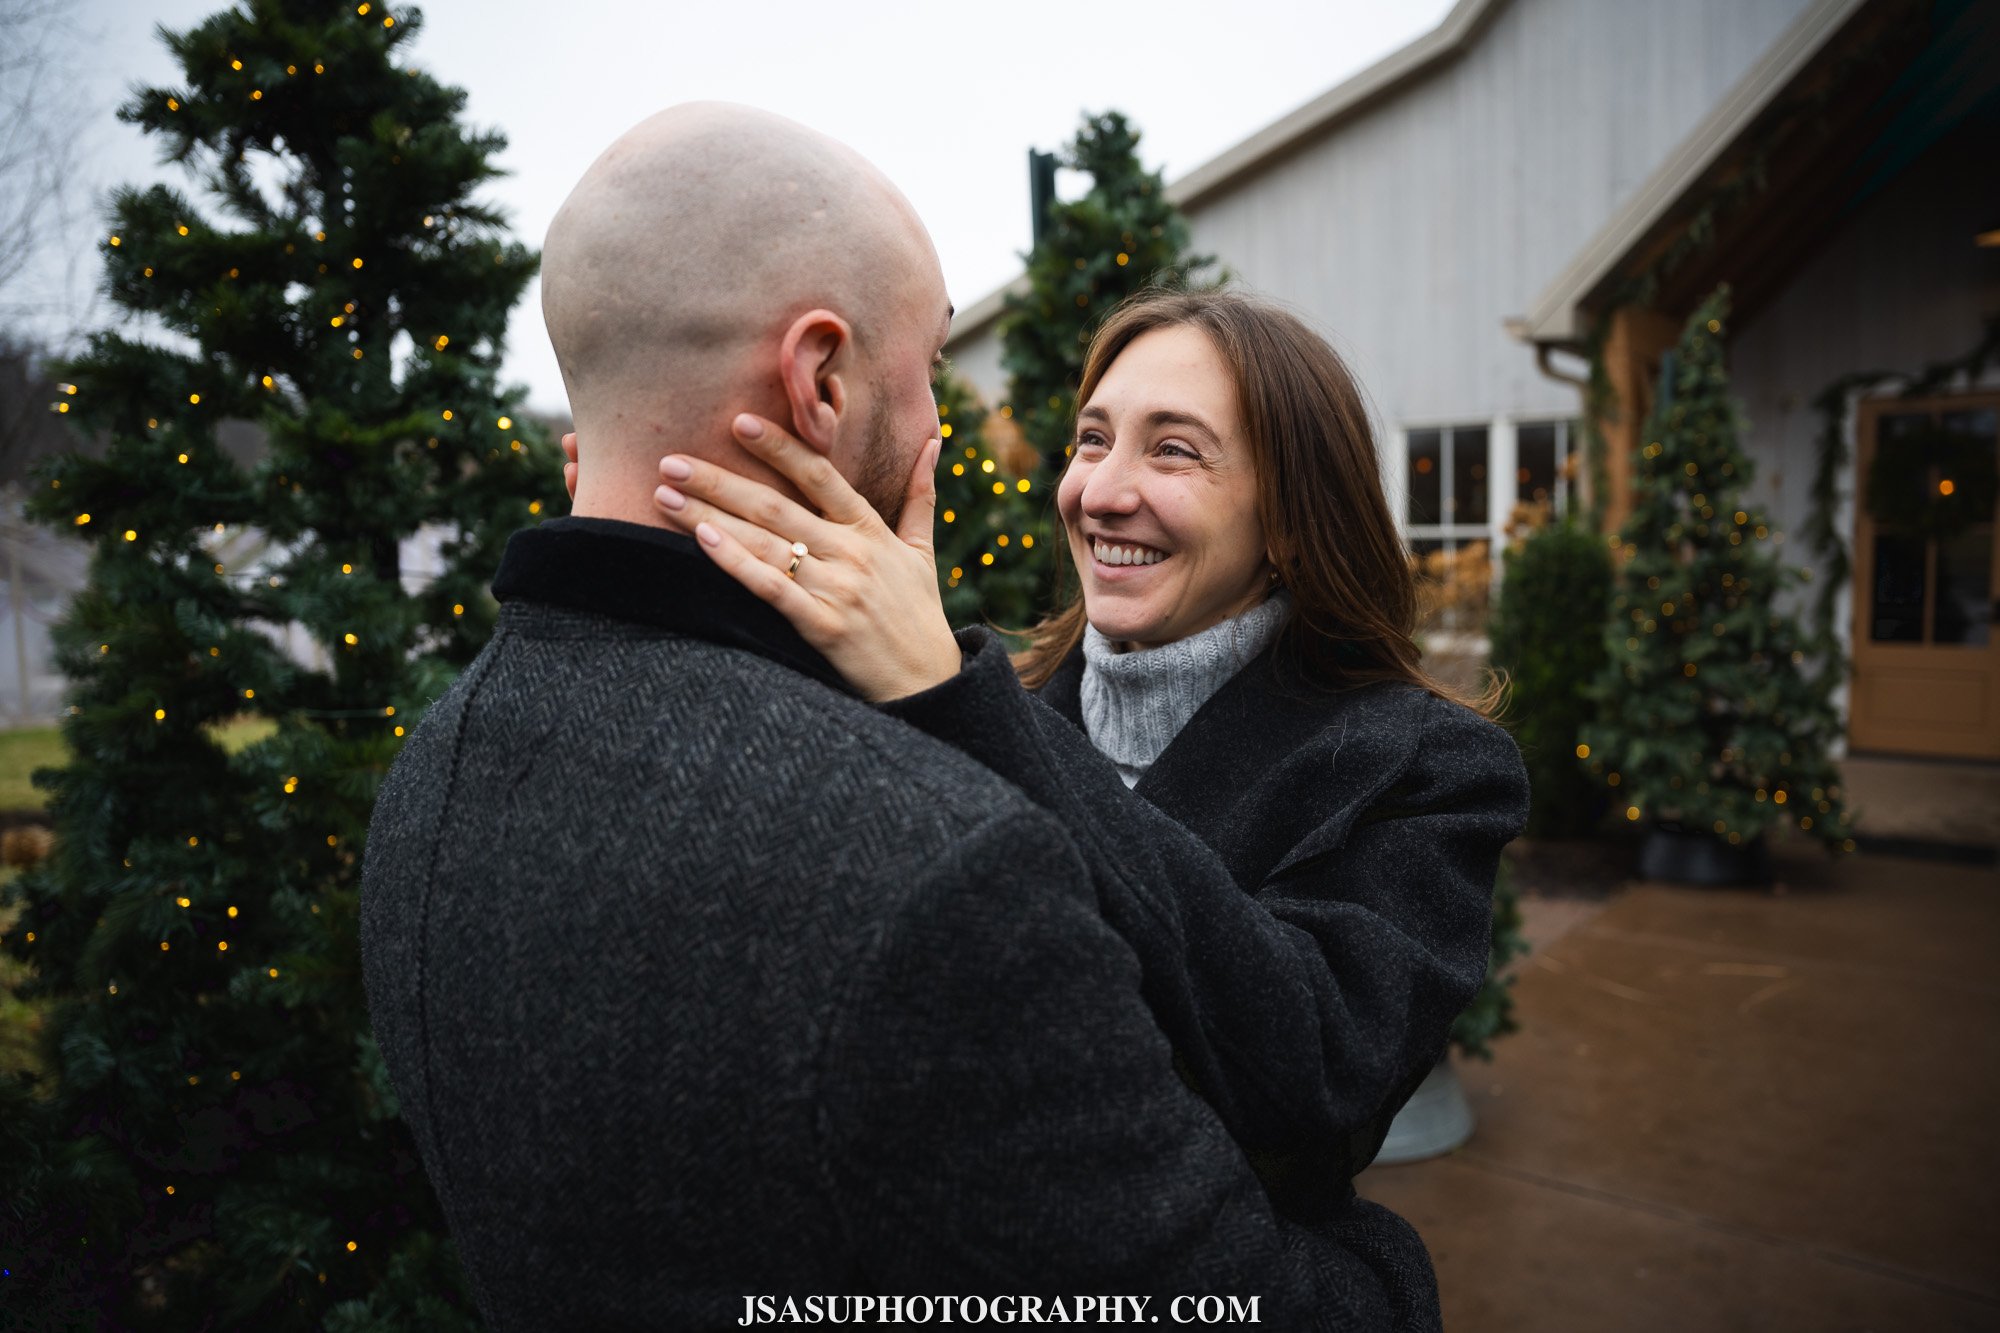 drew-alex-surprise-proposal-photos-old-westminister-winery-jsasuphotography-14.jpg